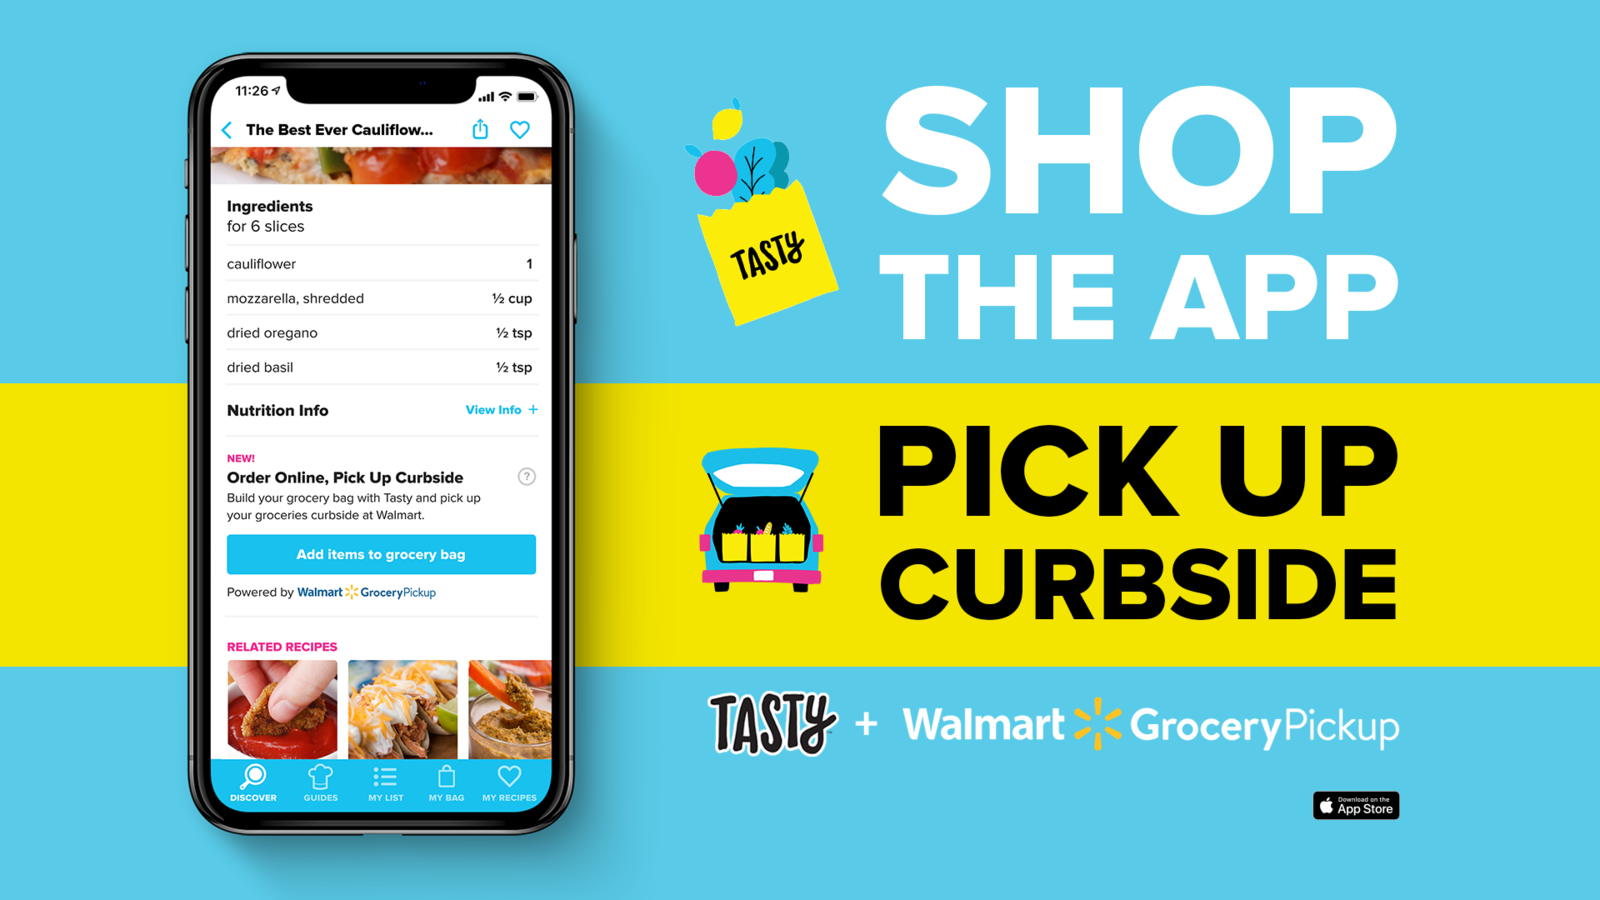 Advertisement for Tasty and Walmart Grocery Pickup with mobile app screen showing a recipe and curbside pickup option